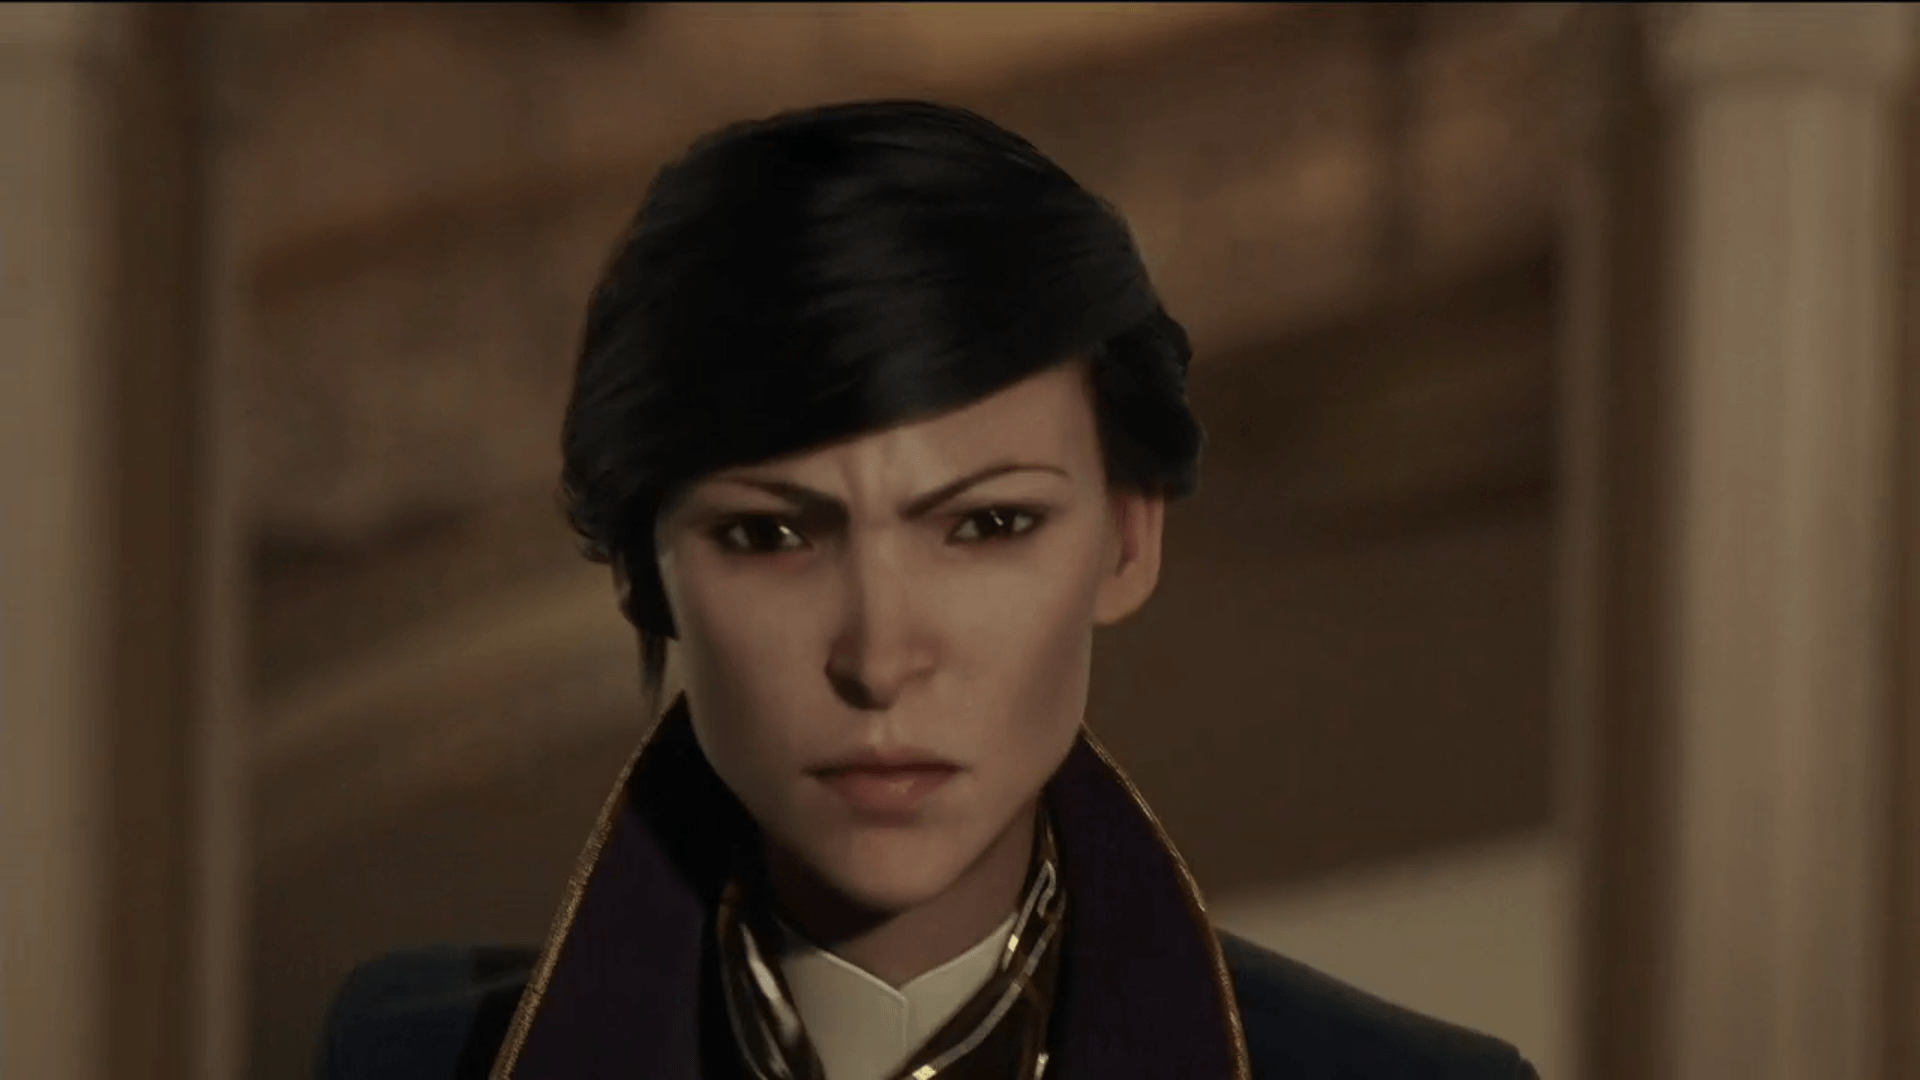 Dishonored 2 Video Explains Who Emily Kaldwin Is and Showcases Her Powers